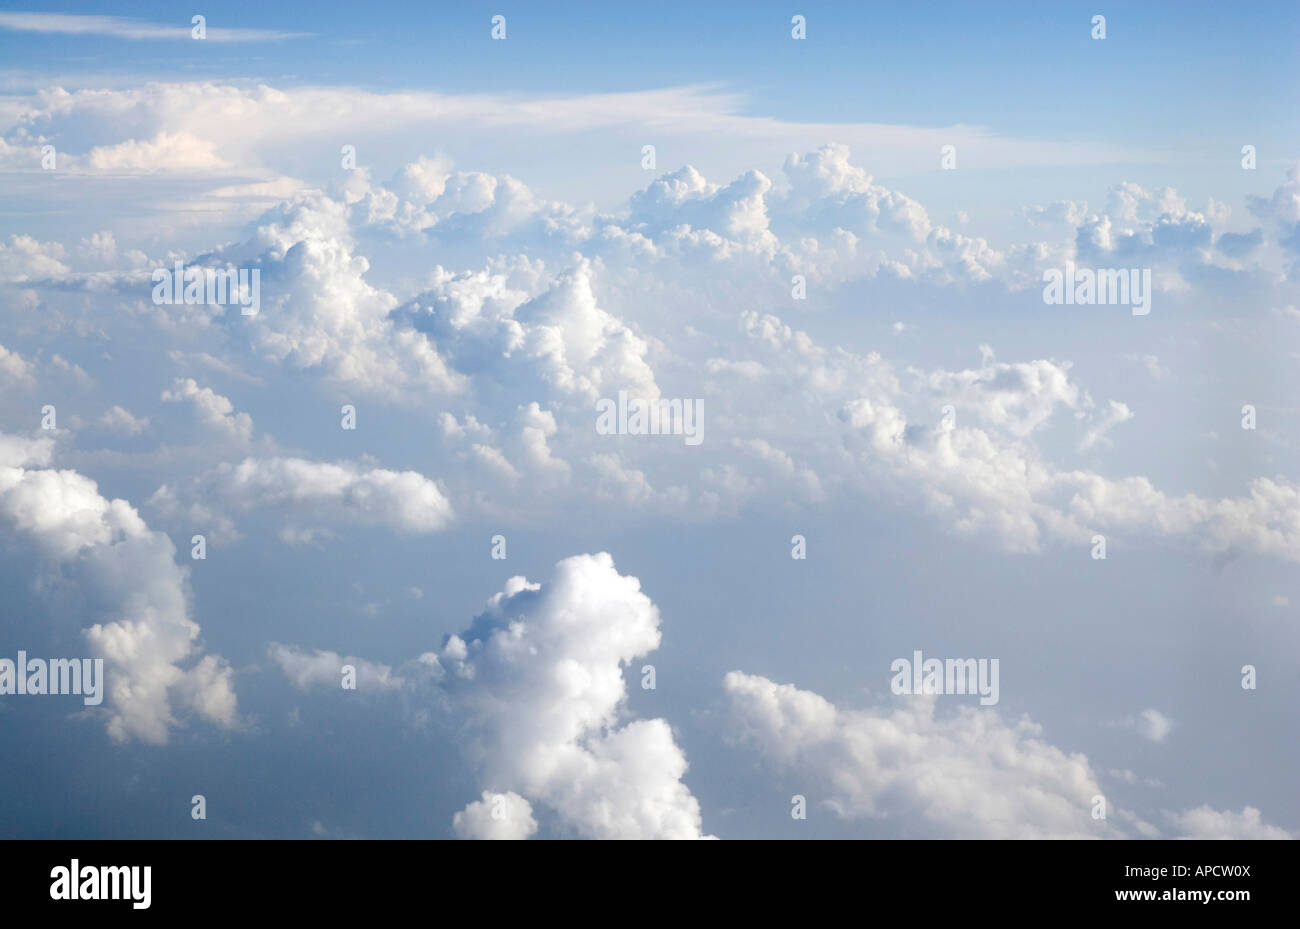 Flying over white clouds, blue sky Stock Photo